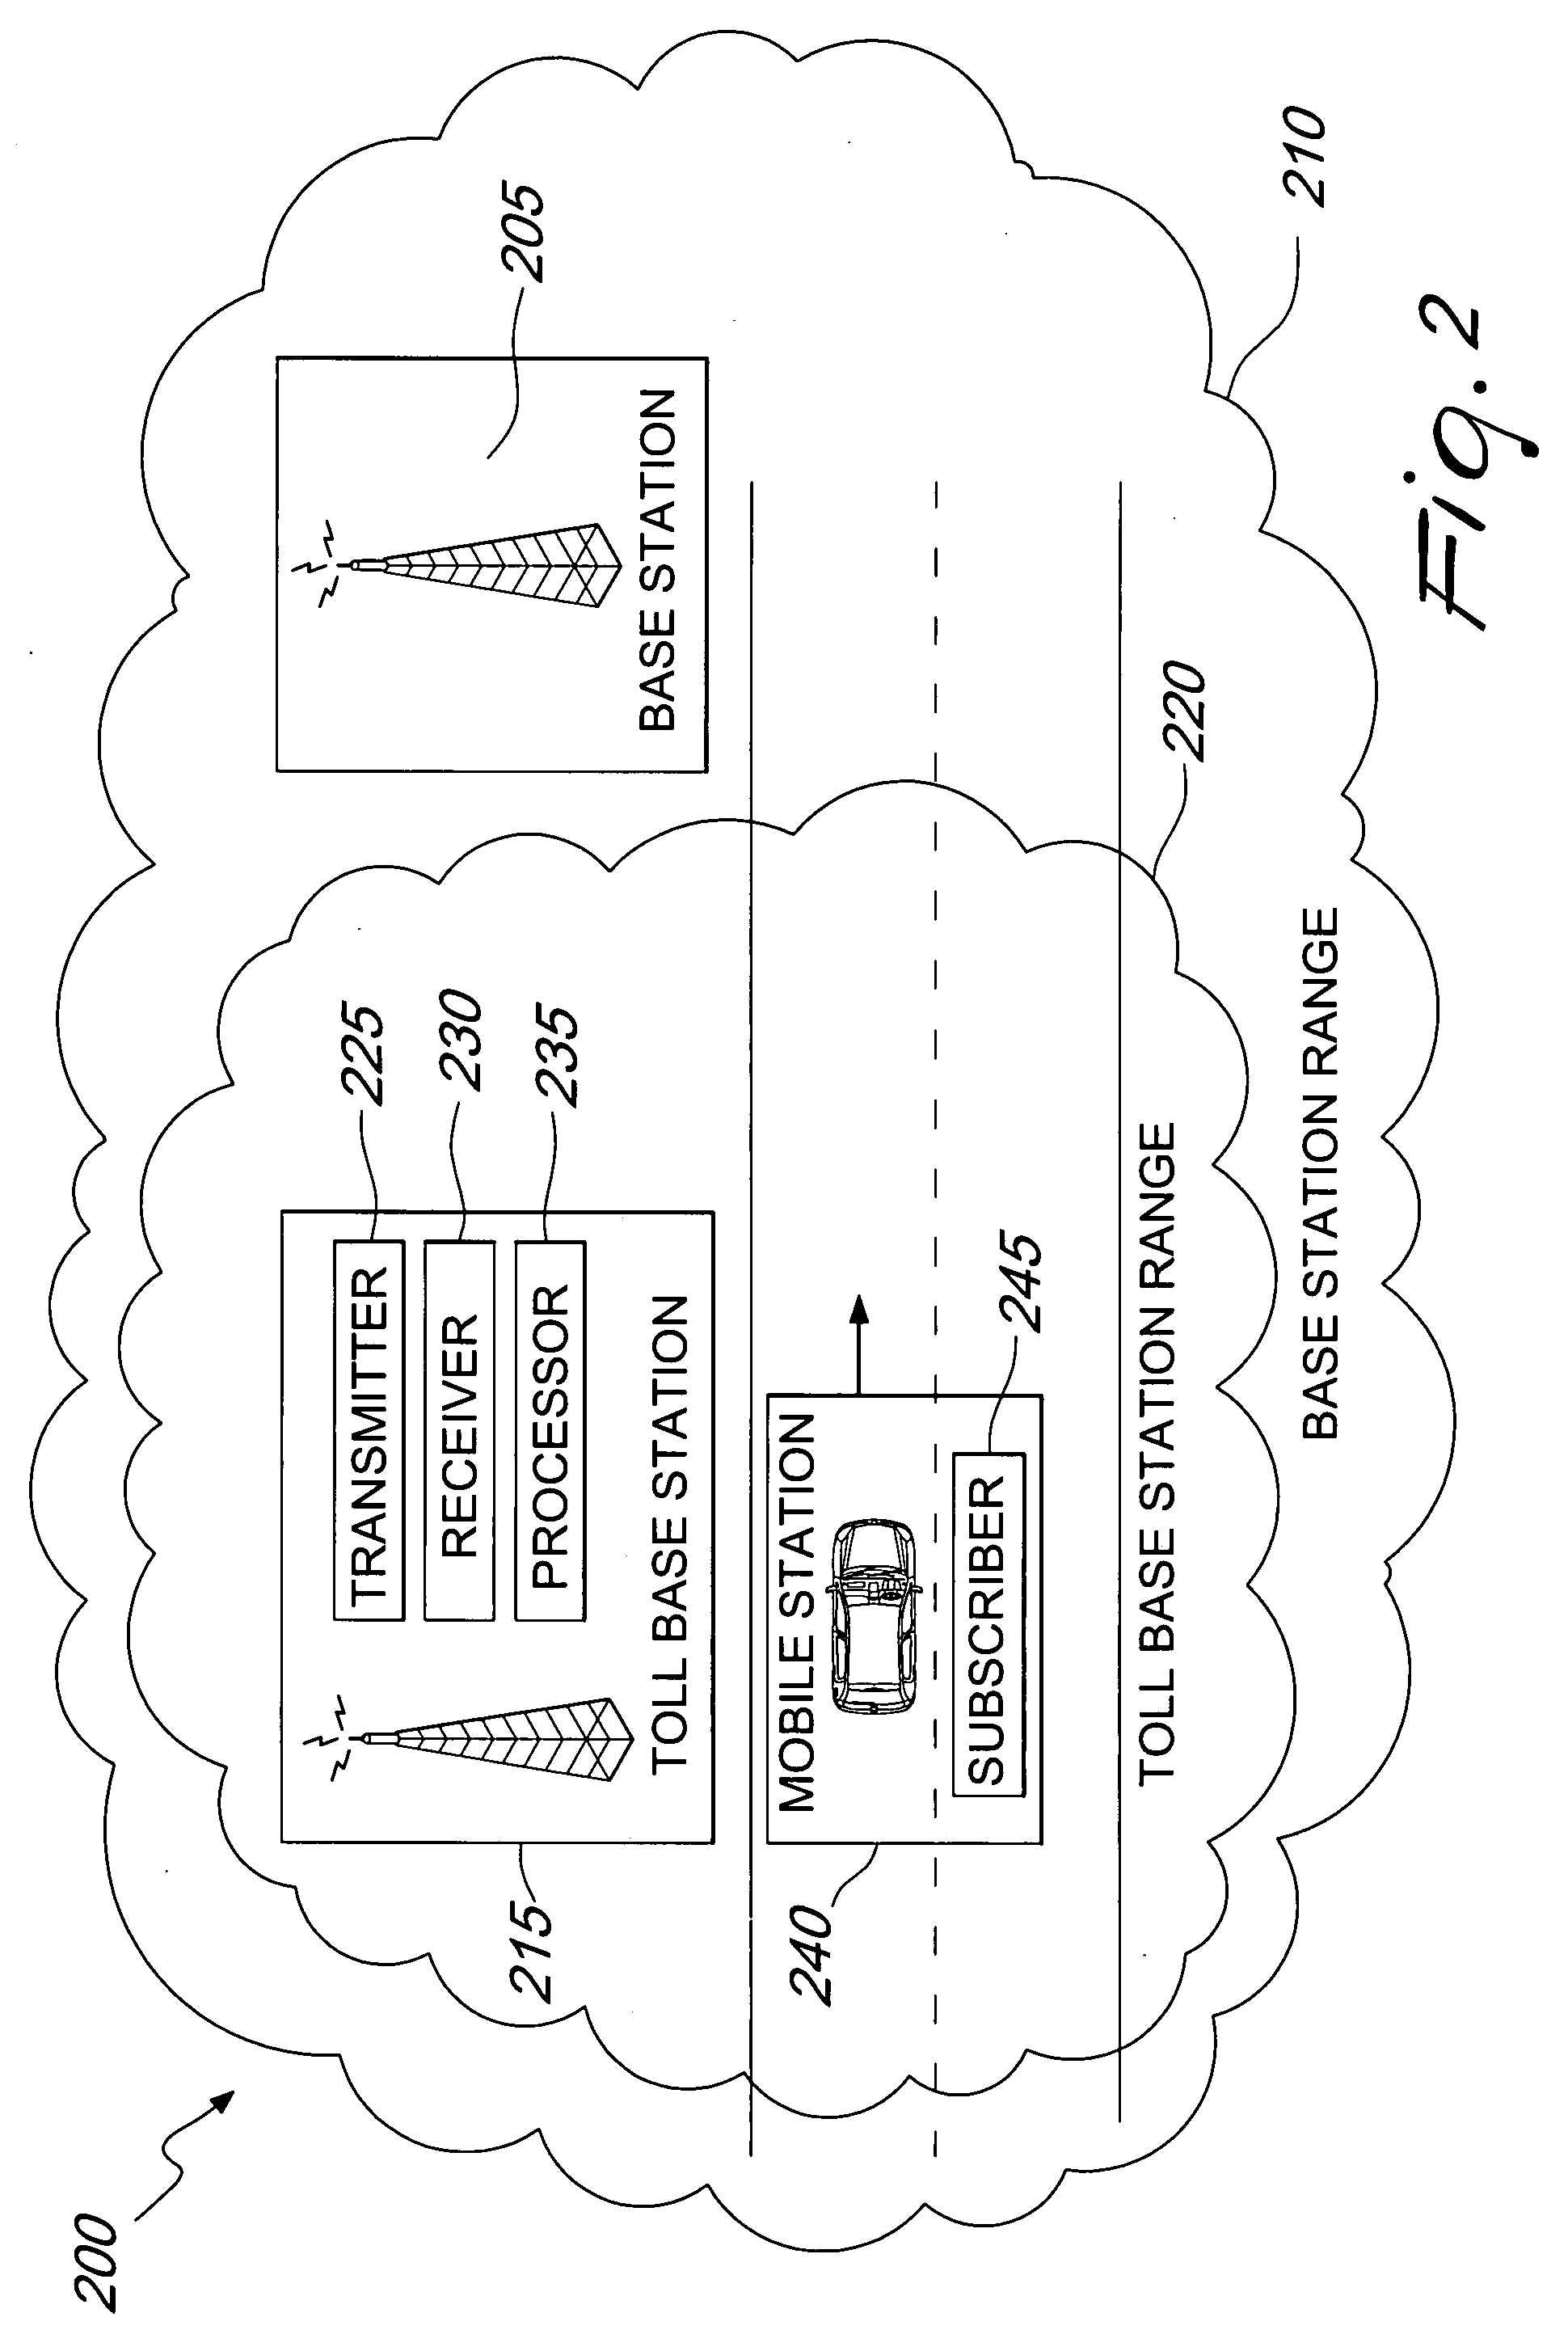 Systems and methods for automated wireless authorization for entry into a geographic area